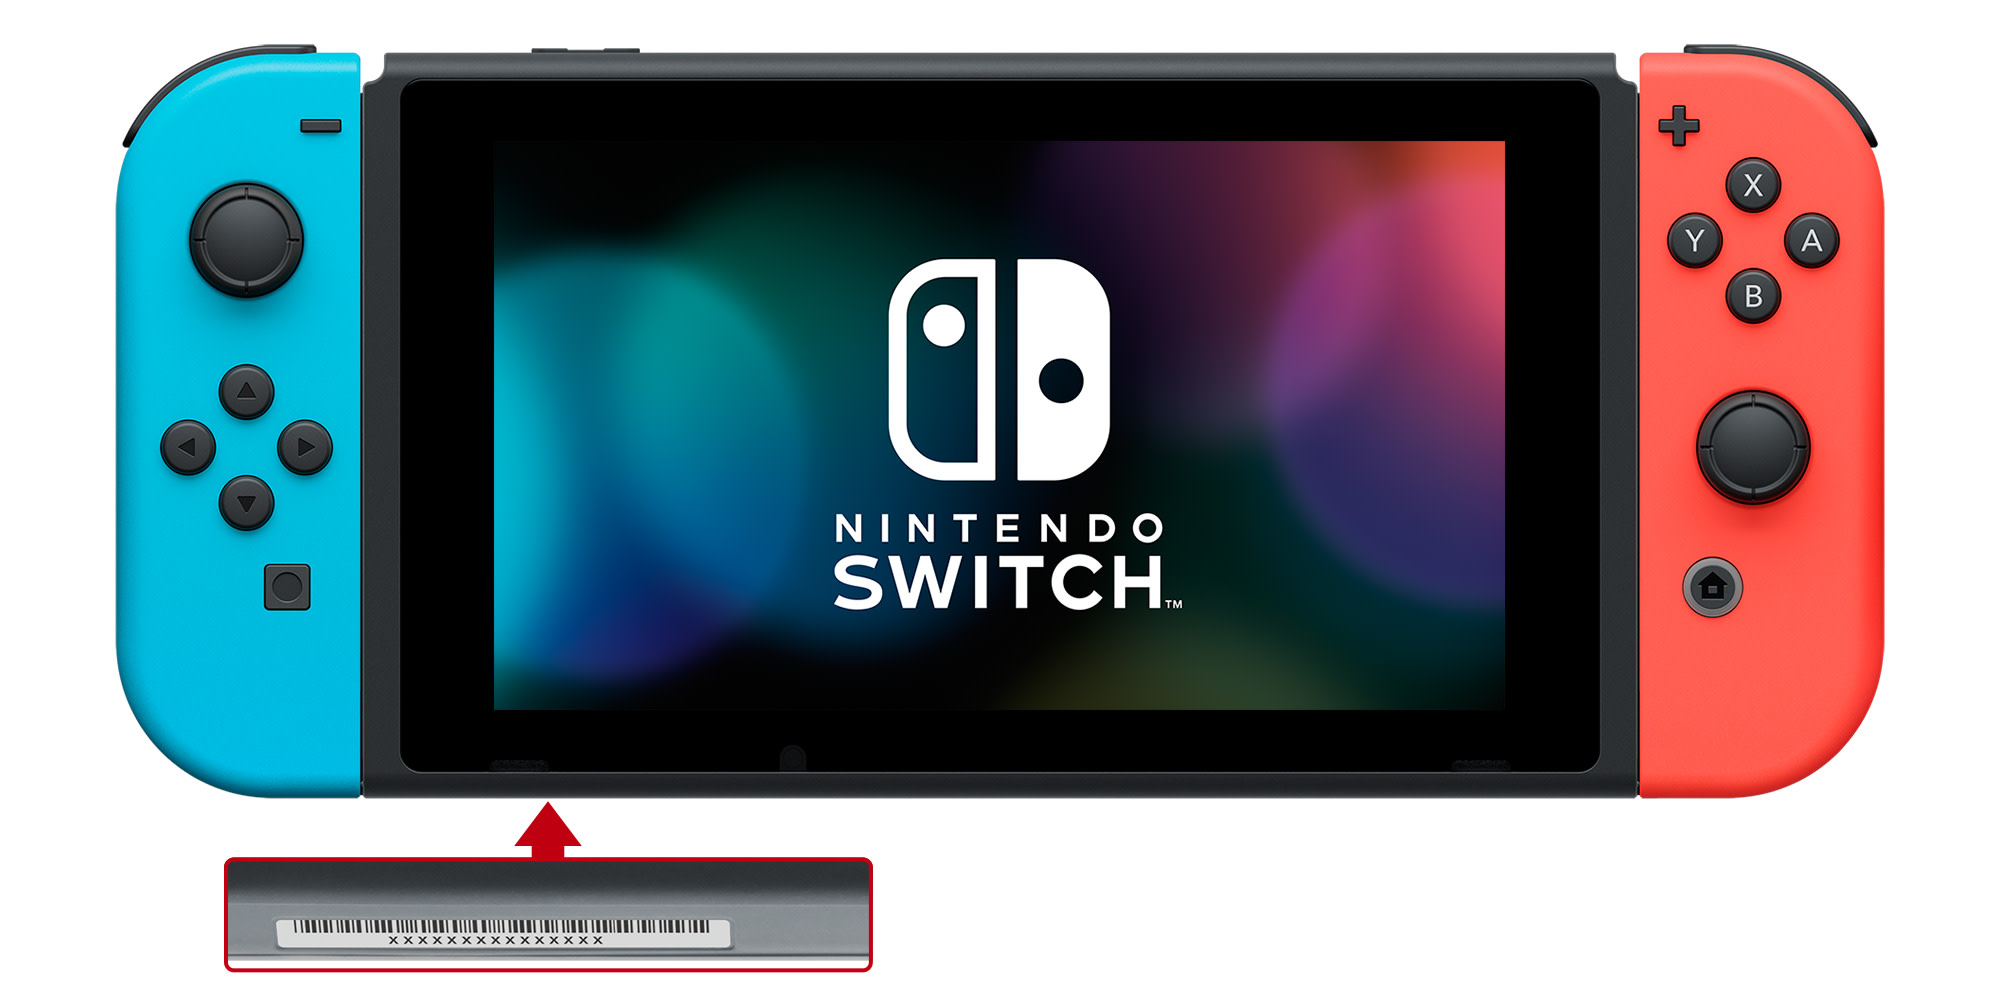 How to Find the Serial Number on Nintendo Switch - Image 6